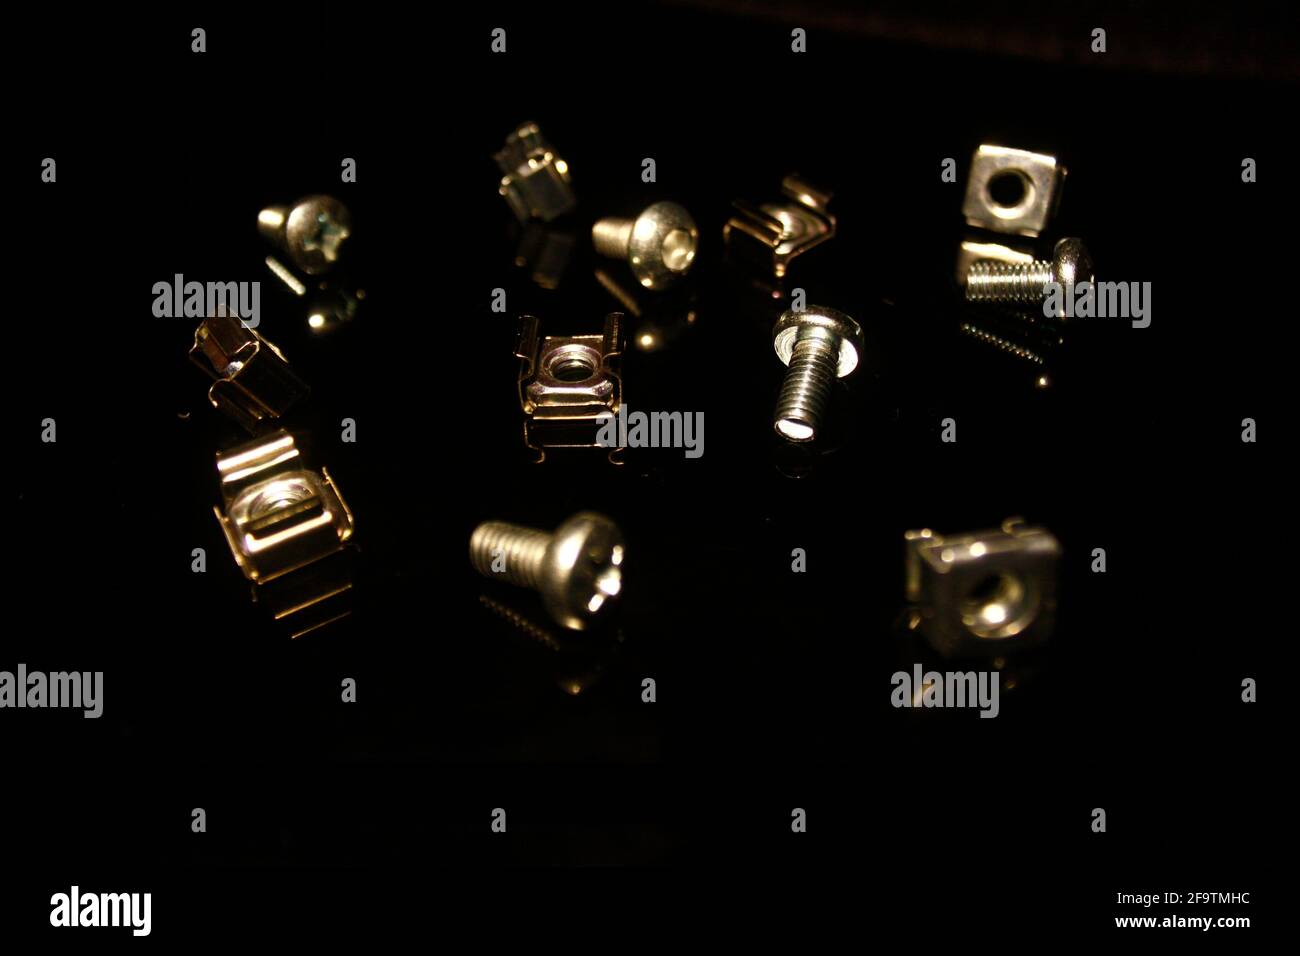 Rack data screw and bolts isolated on black with reflections Stock Photo